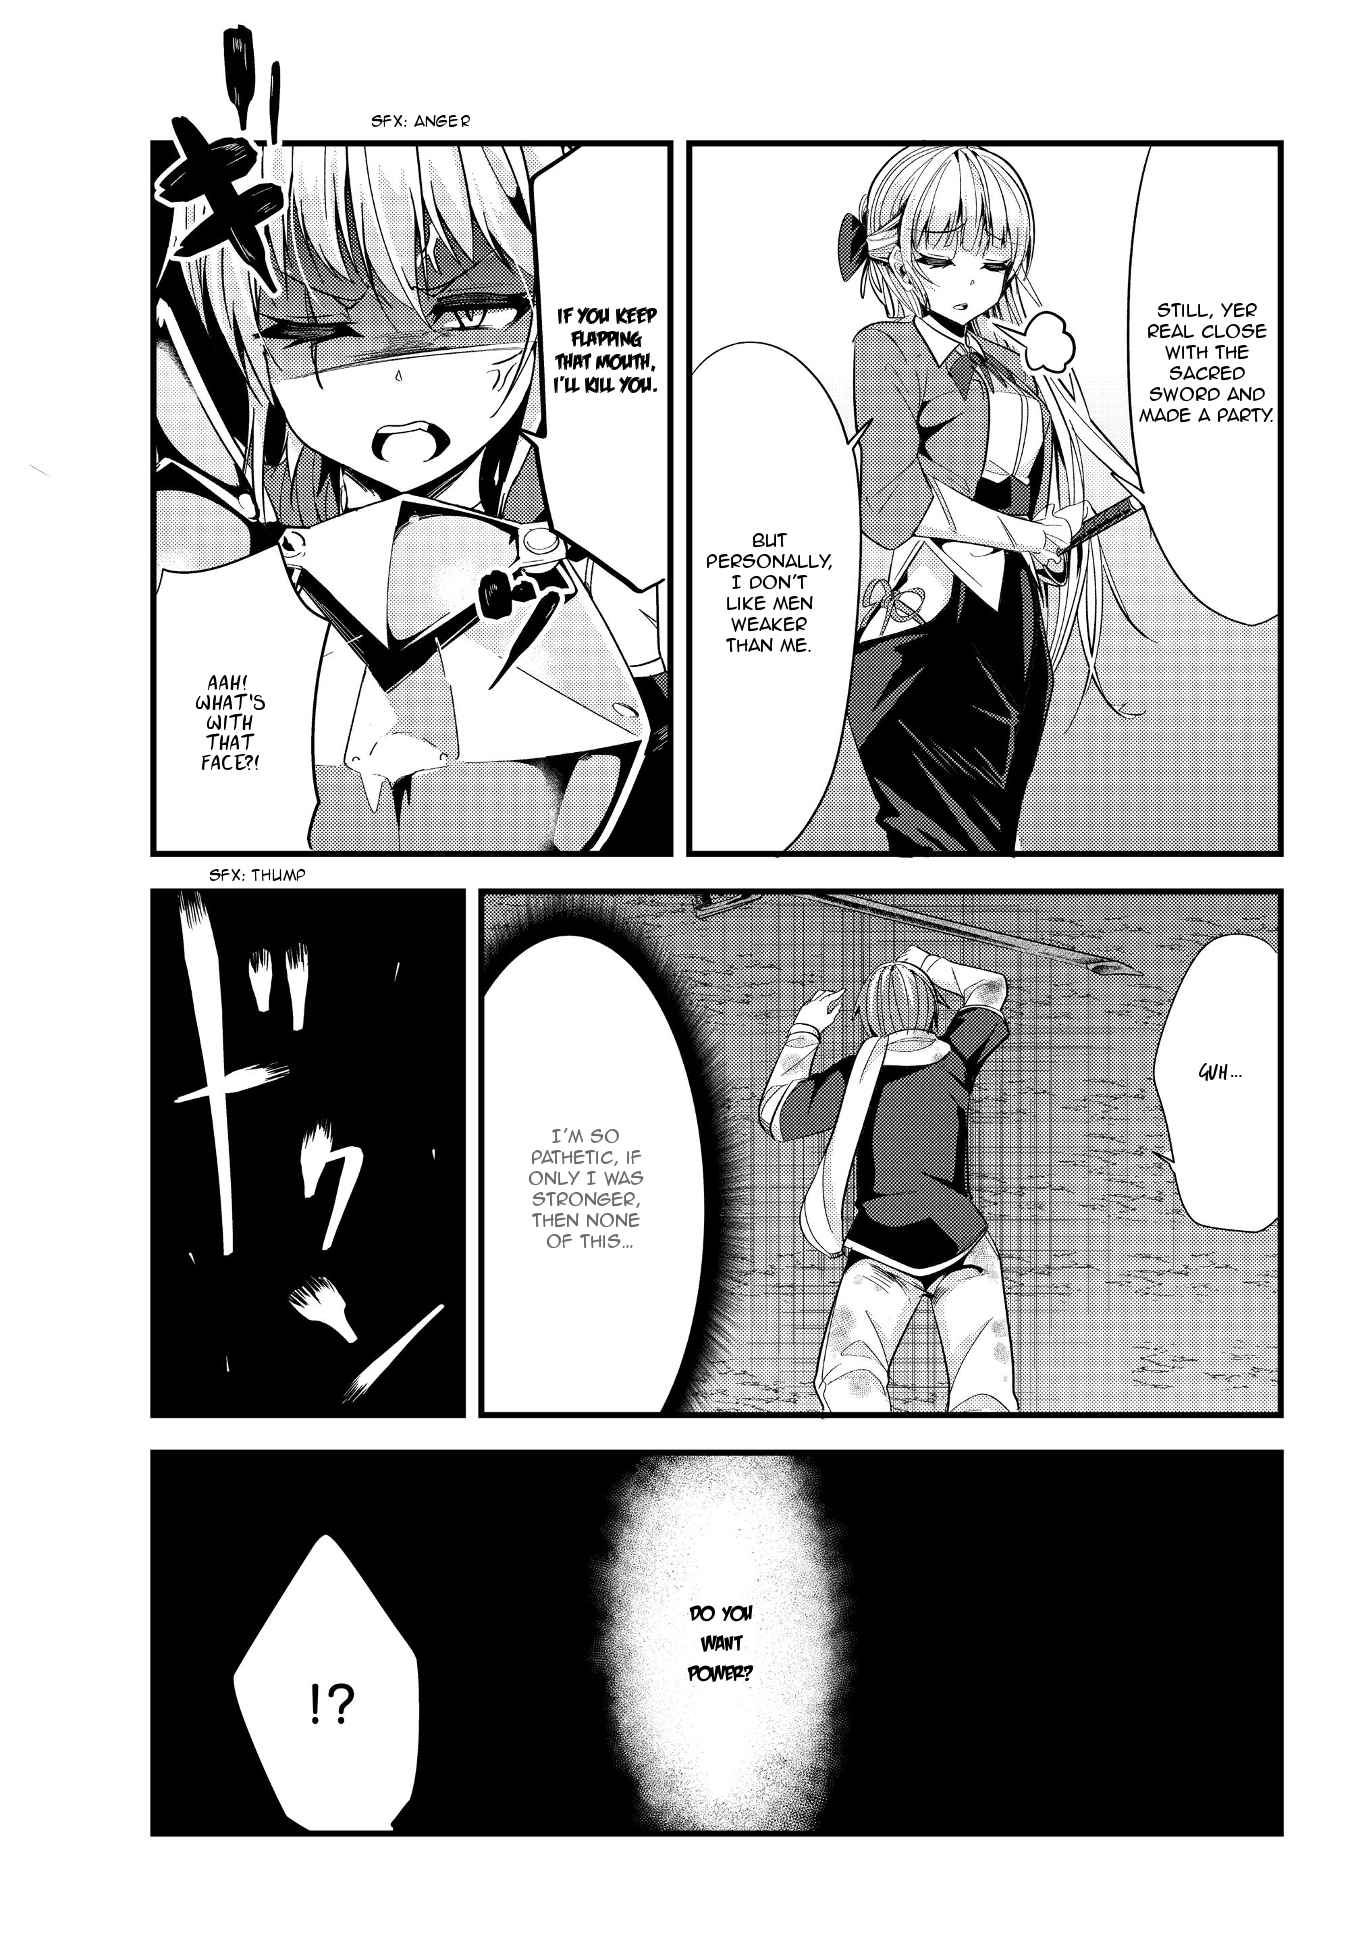 A Story About Treating a Female Knight Who Has Never Been Treated as a Woman Ch.61